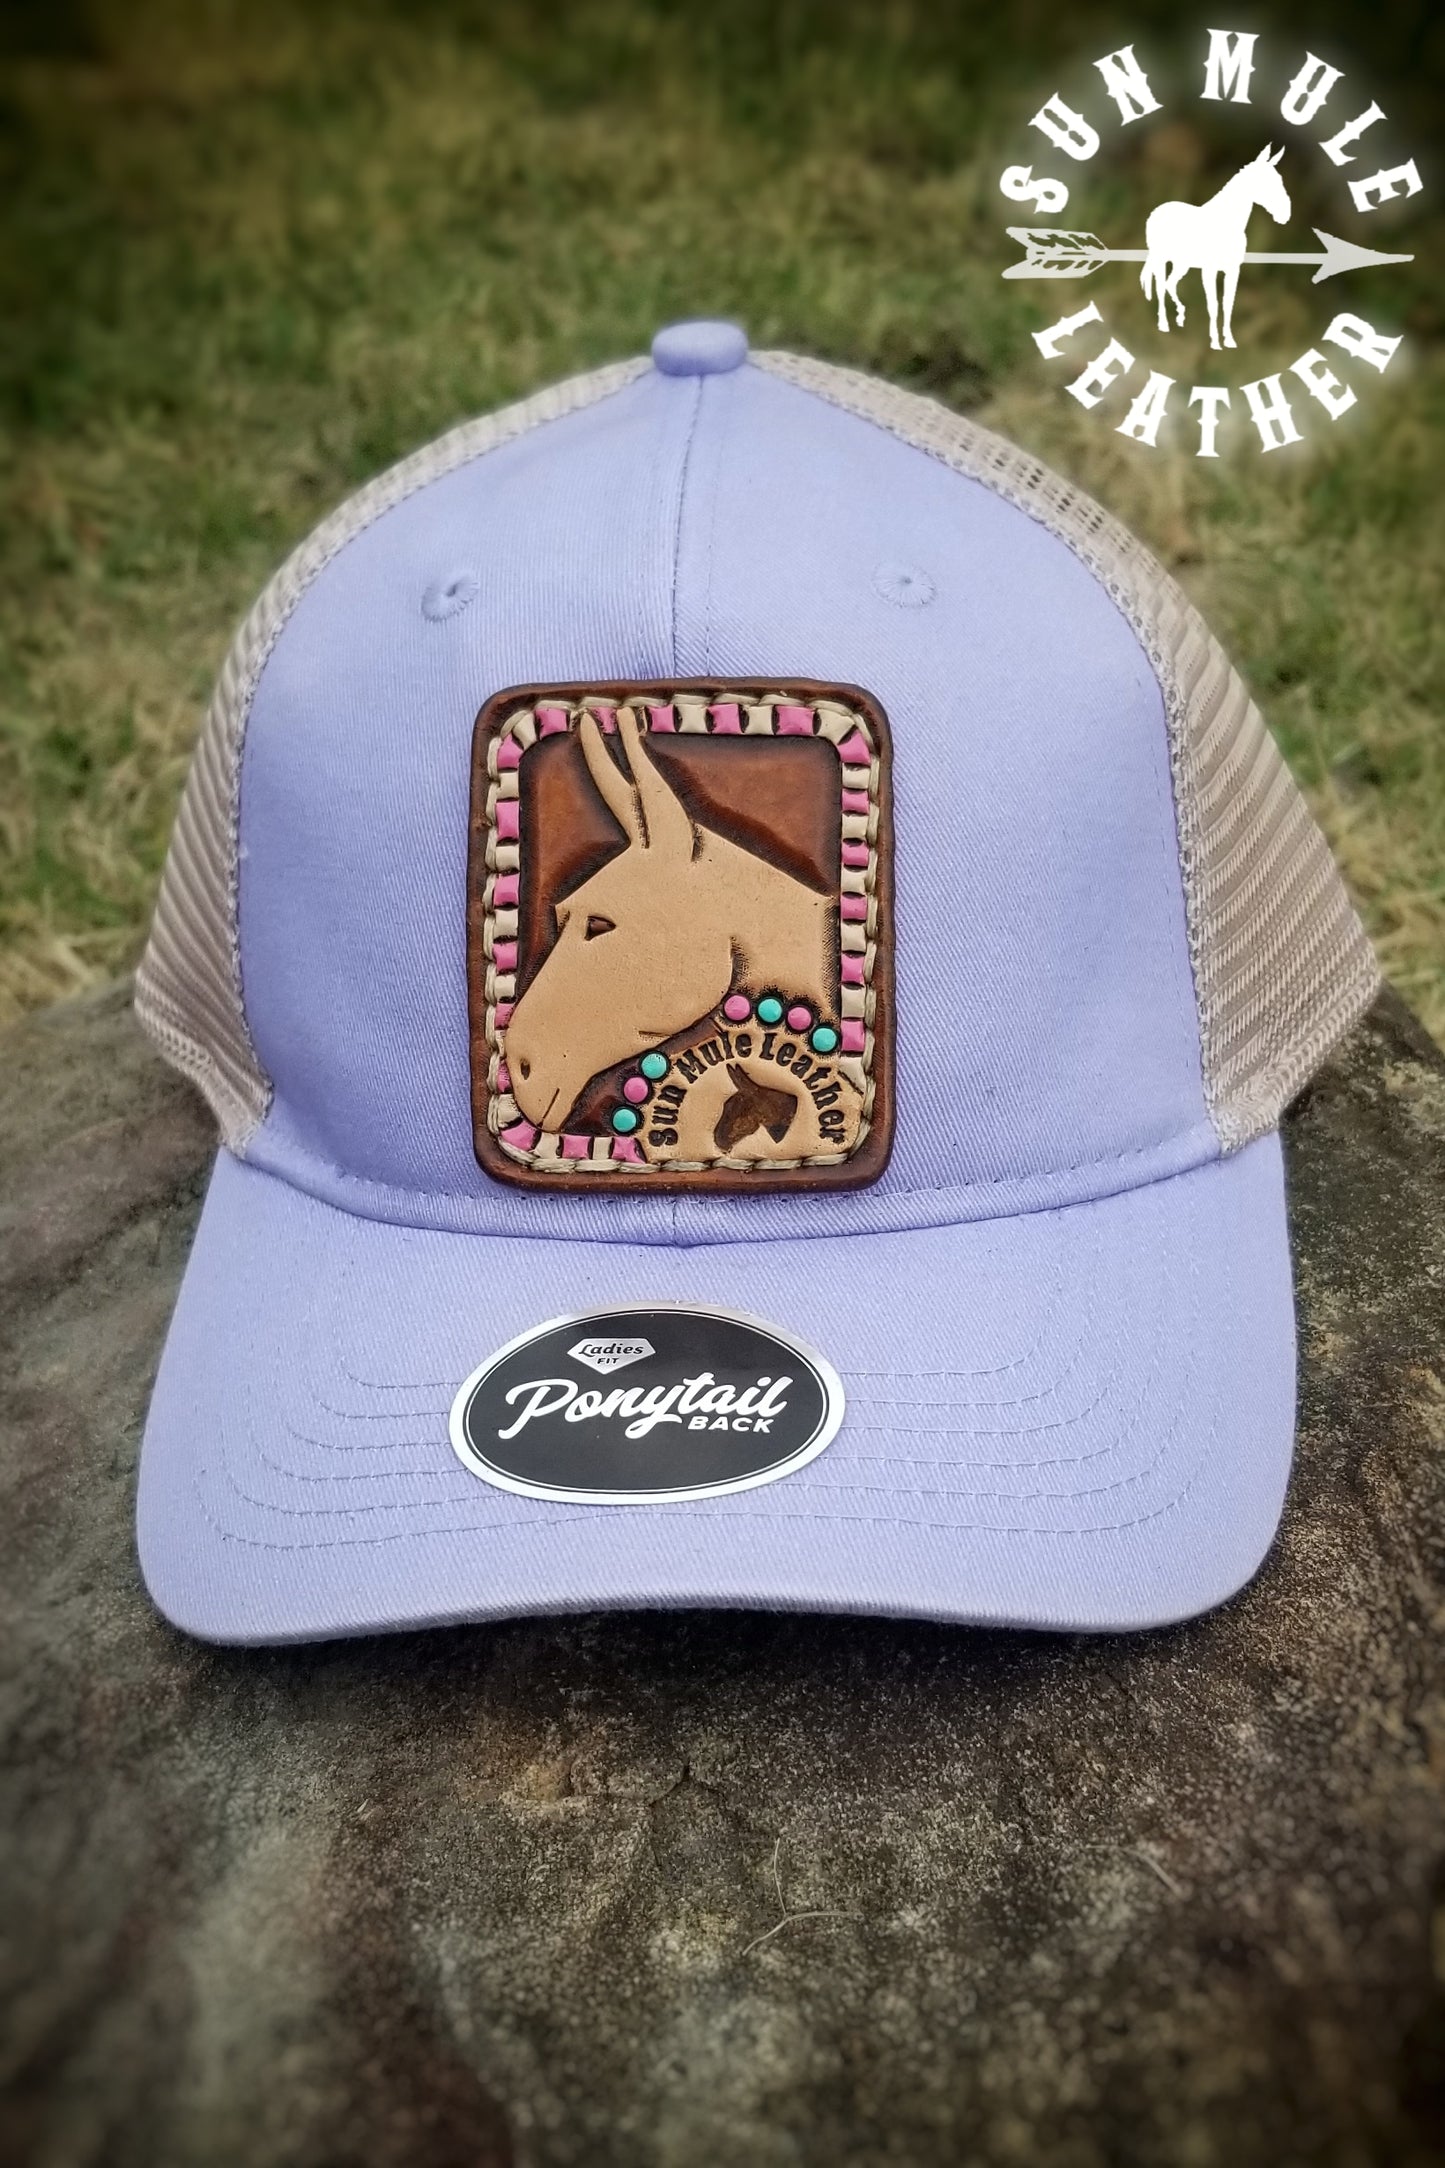 Sun Mule Leather Lavender handtooled mule hat patch, handsewn to ponytail hat.